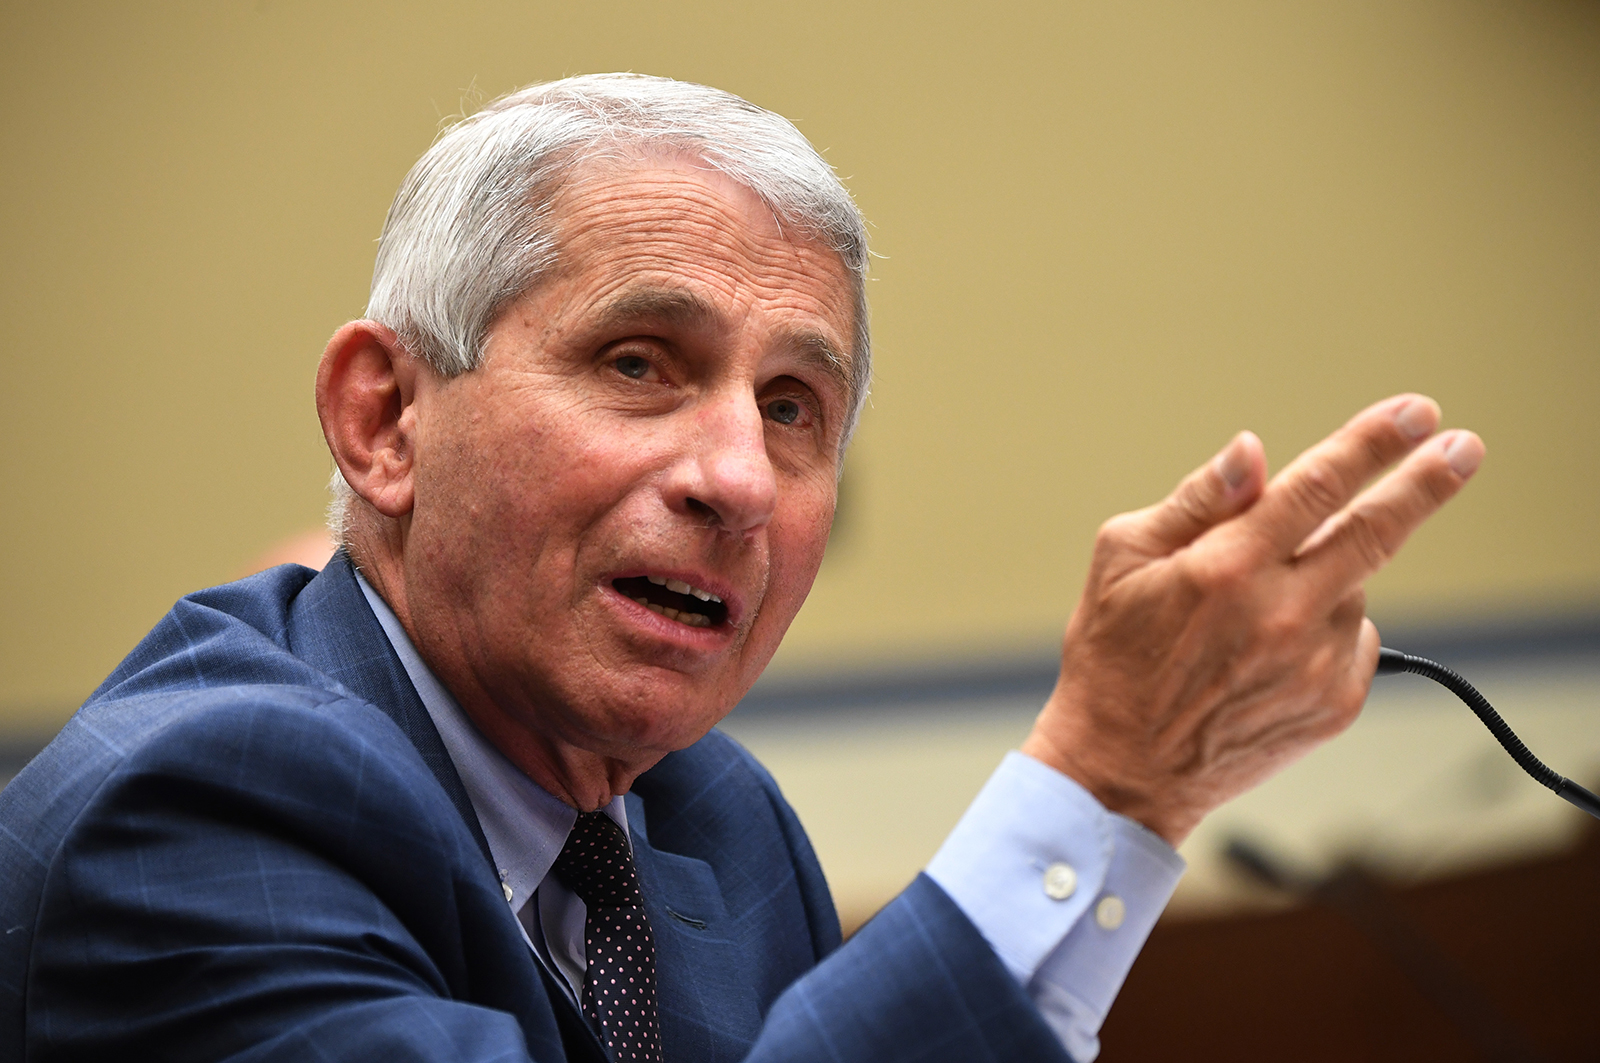 Dr. Anthony Fauci, director of the National Institute for Allergy and Infectious Diseases, testifies on Capitol Hill in Washington, DC on July 31.